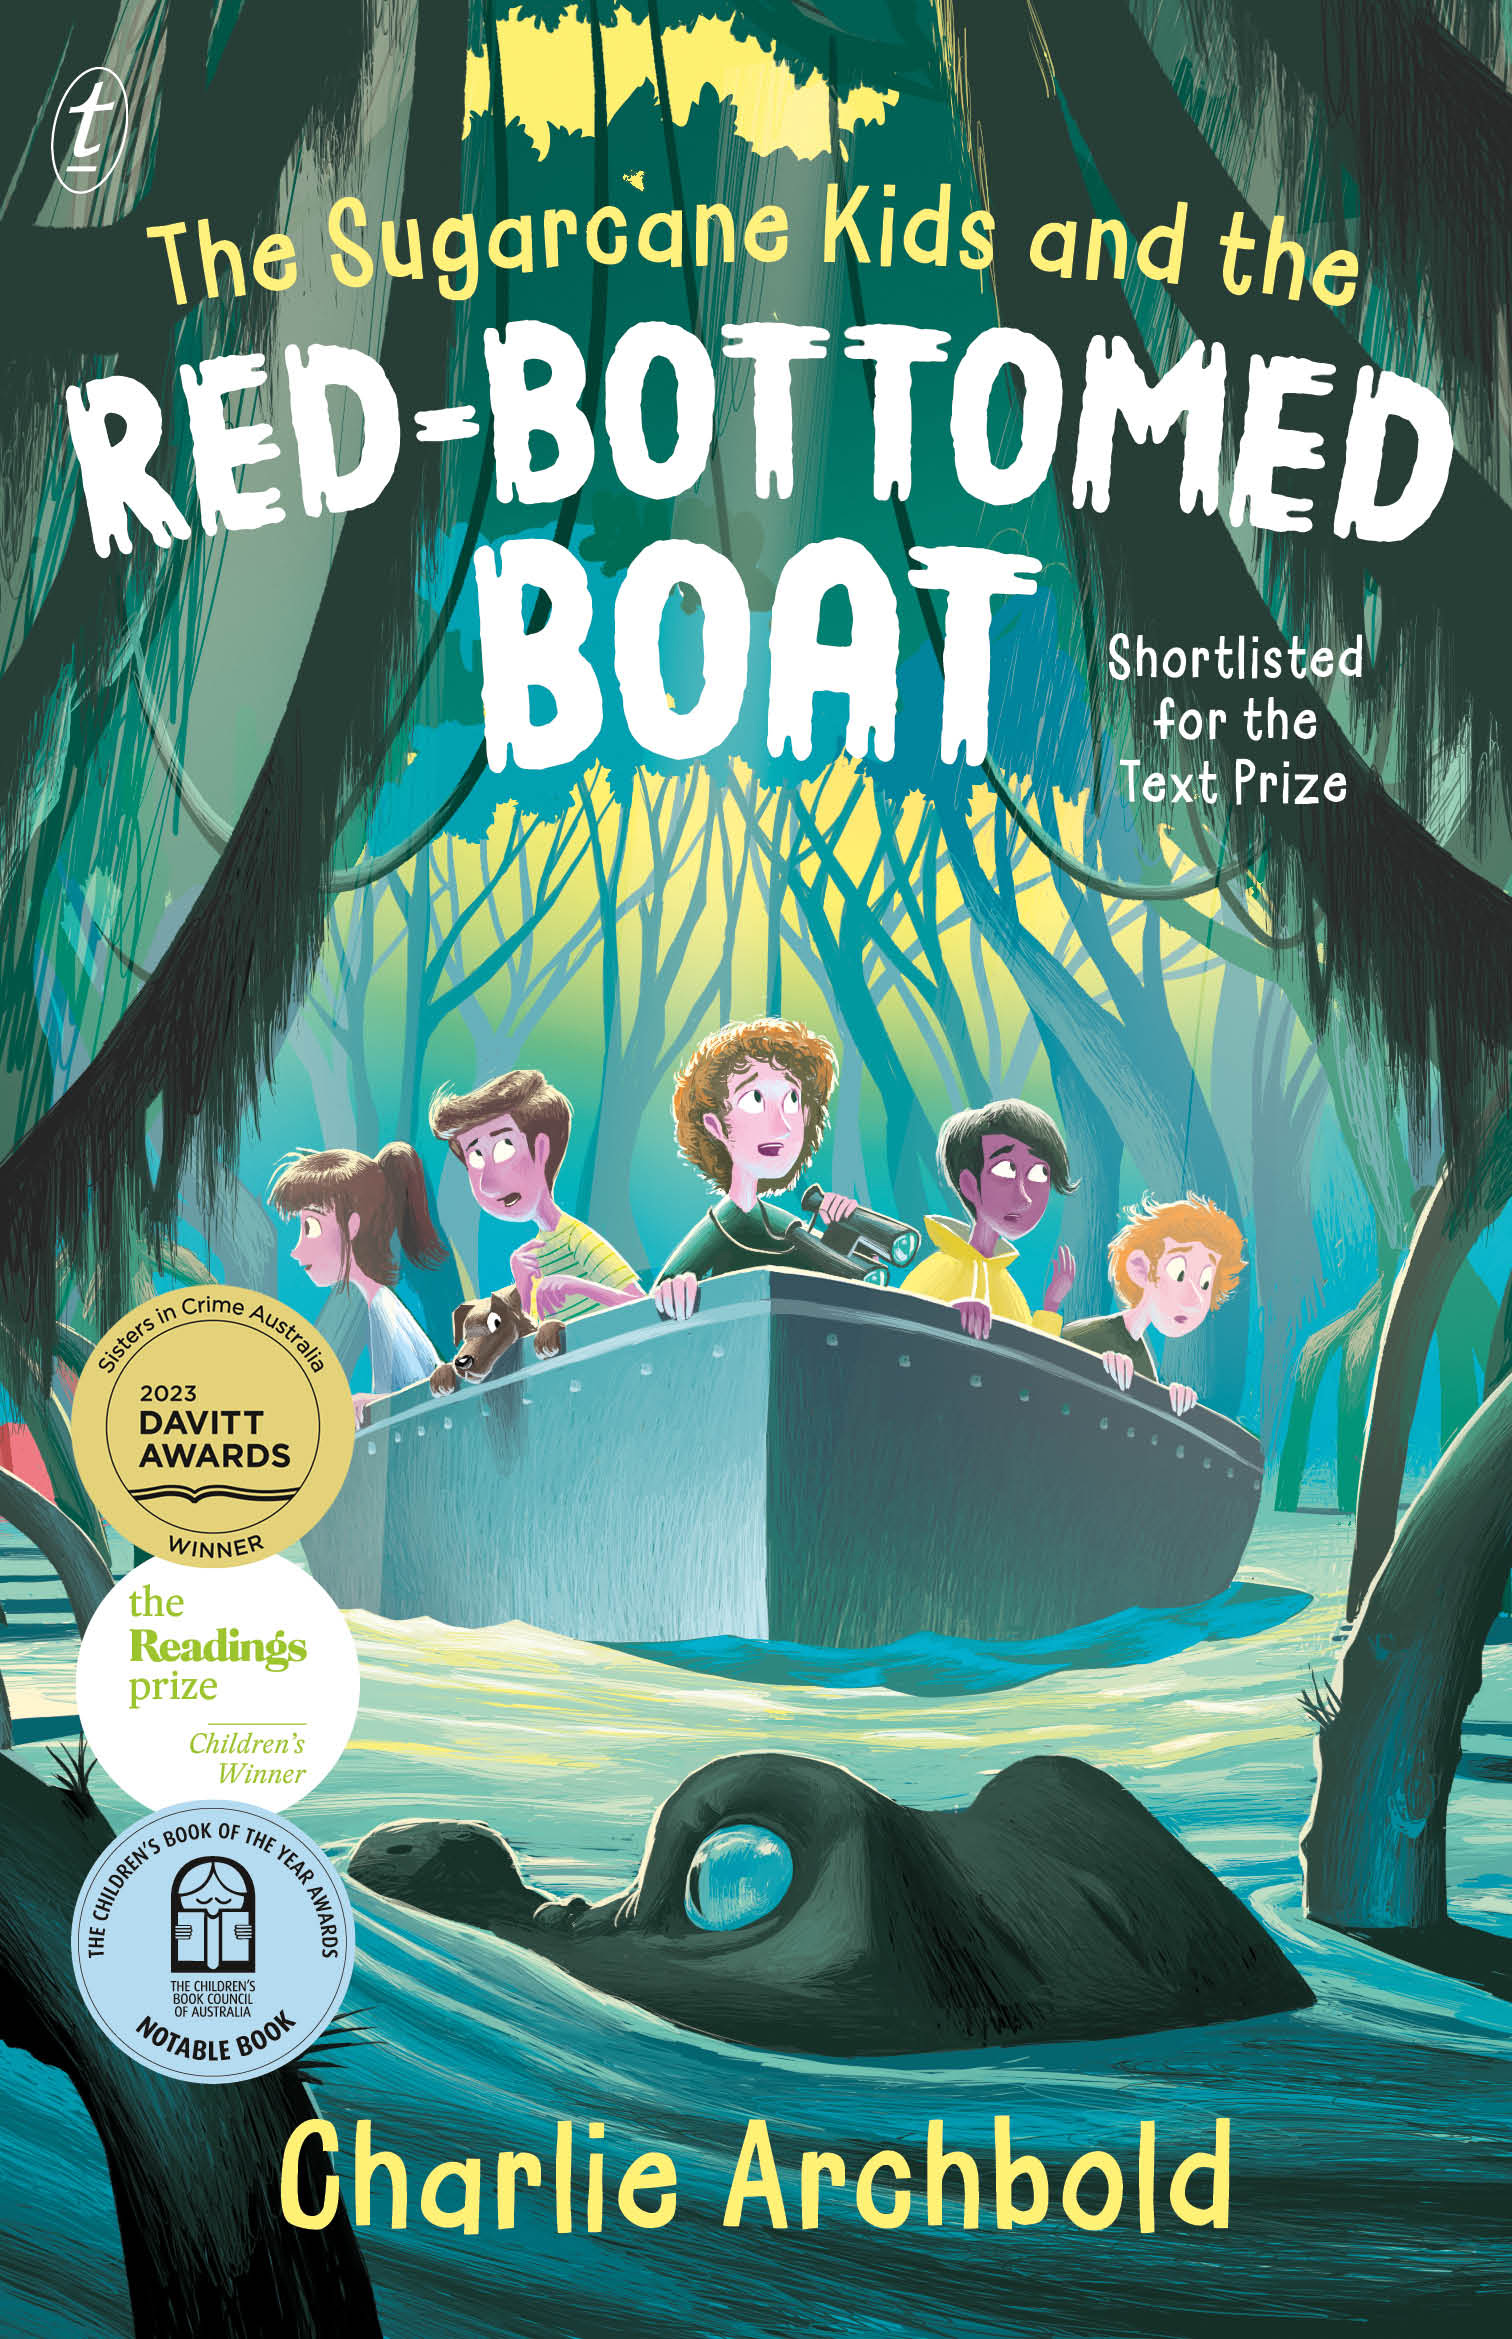 Red-bottomed　Boat,　and　Sugarcane　The　Text　the　Publishing　—　Kids　book